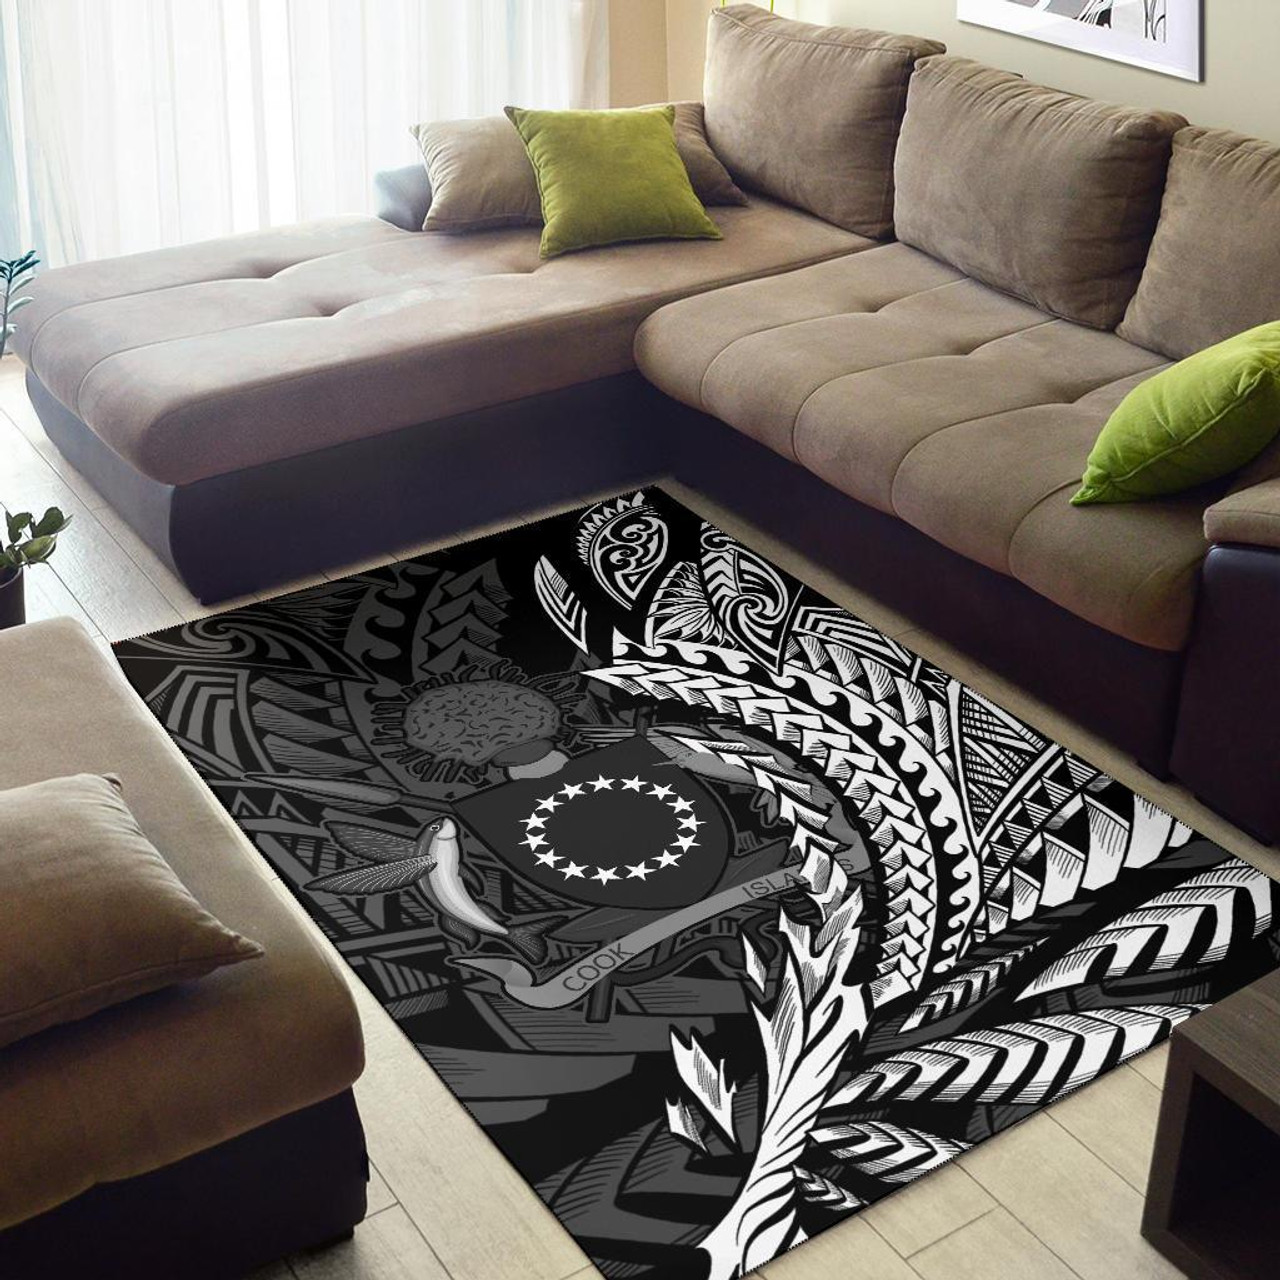 Cook Islands Area Rug - Wings Style Polynesian 2